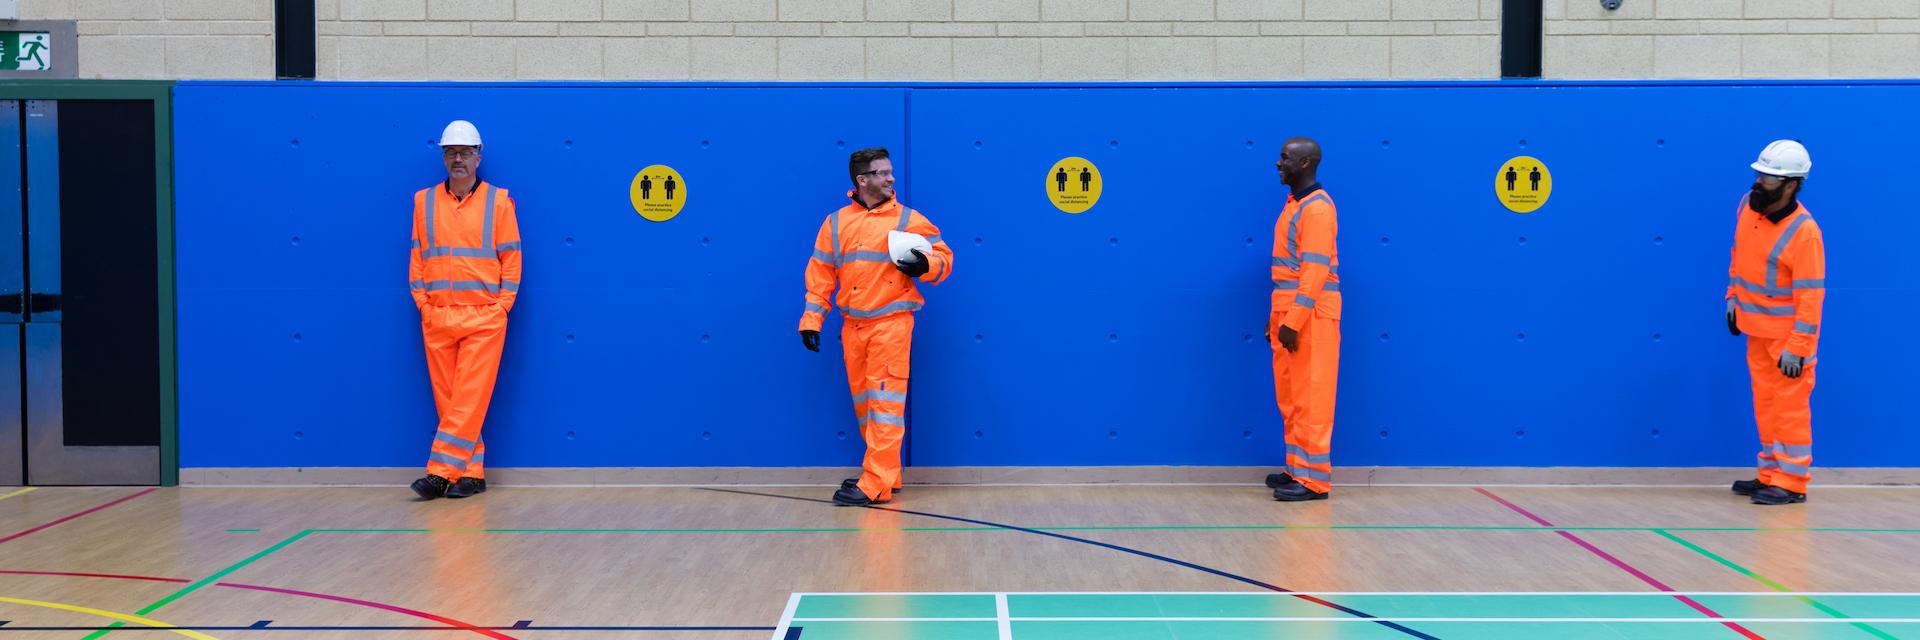 Four rail workers stood next to each other